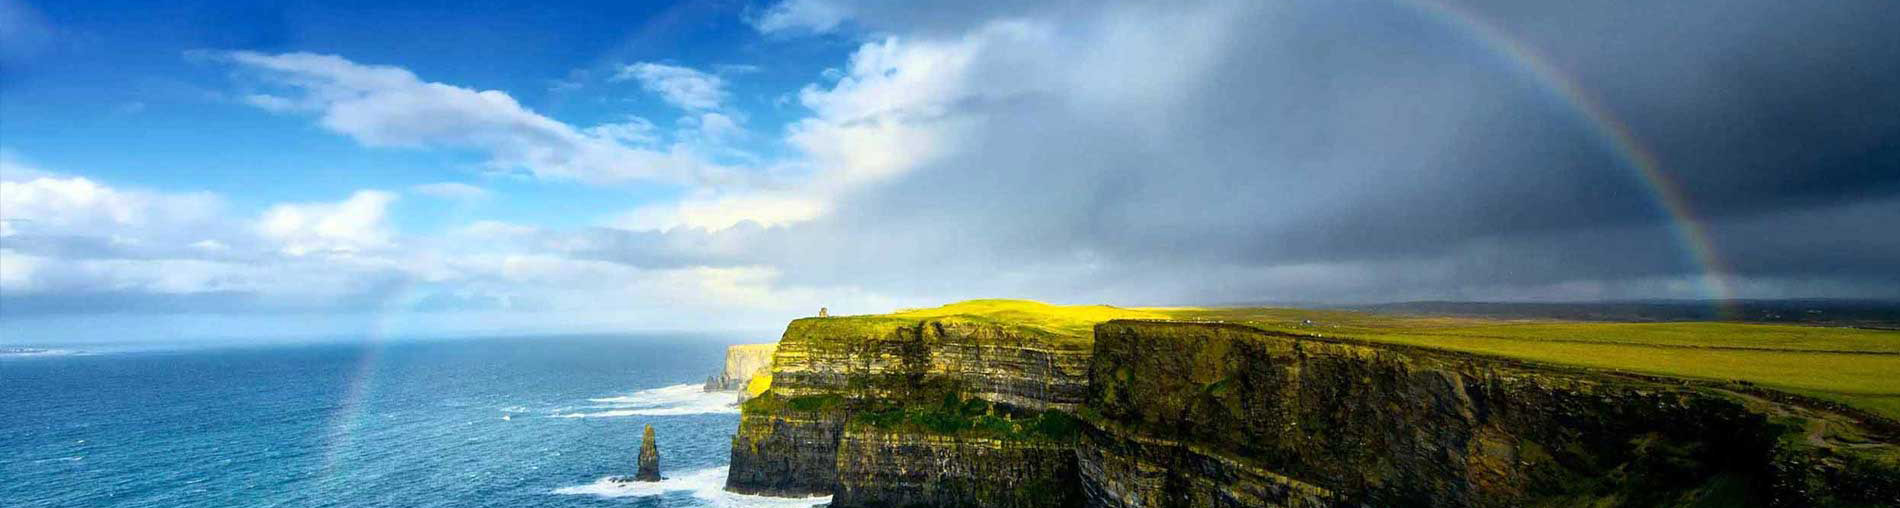 Affordable Holiday Tour Packages to Ireland